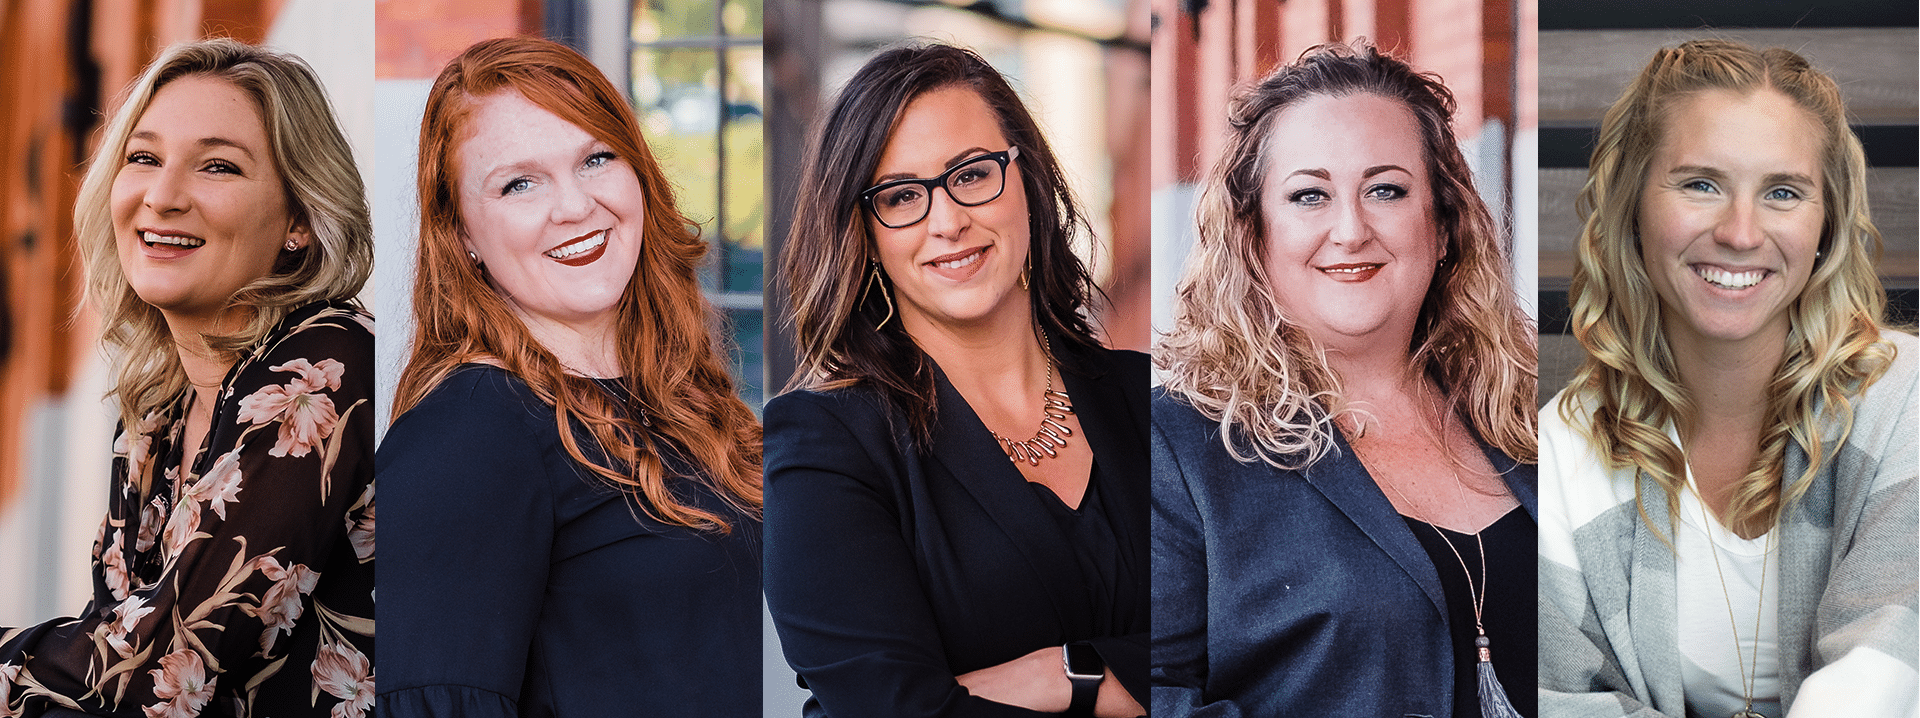 five female marketing professionals in outdoor setting smiling